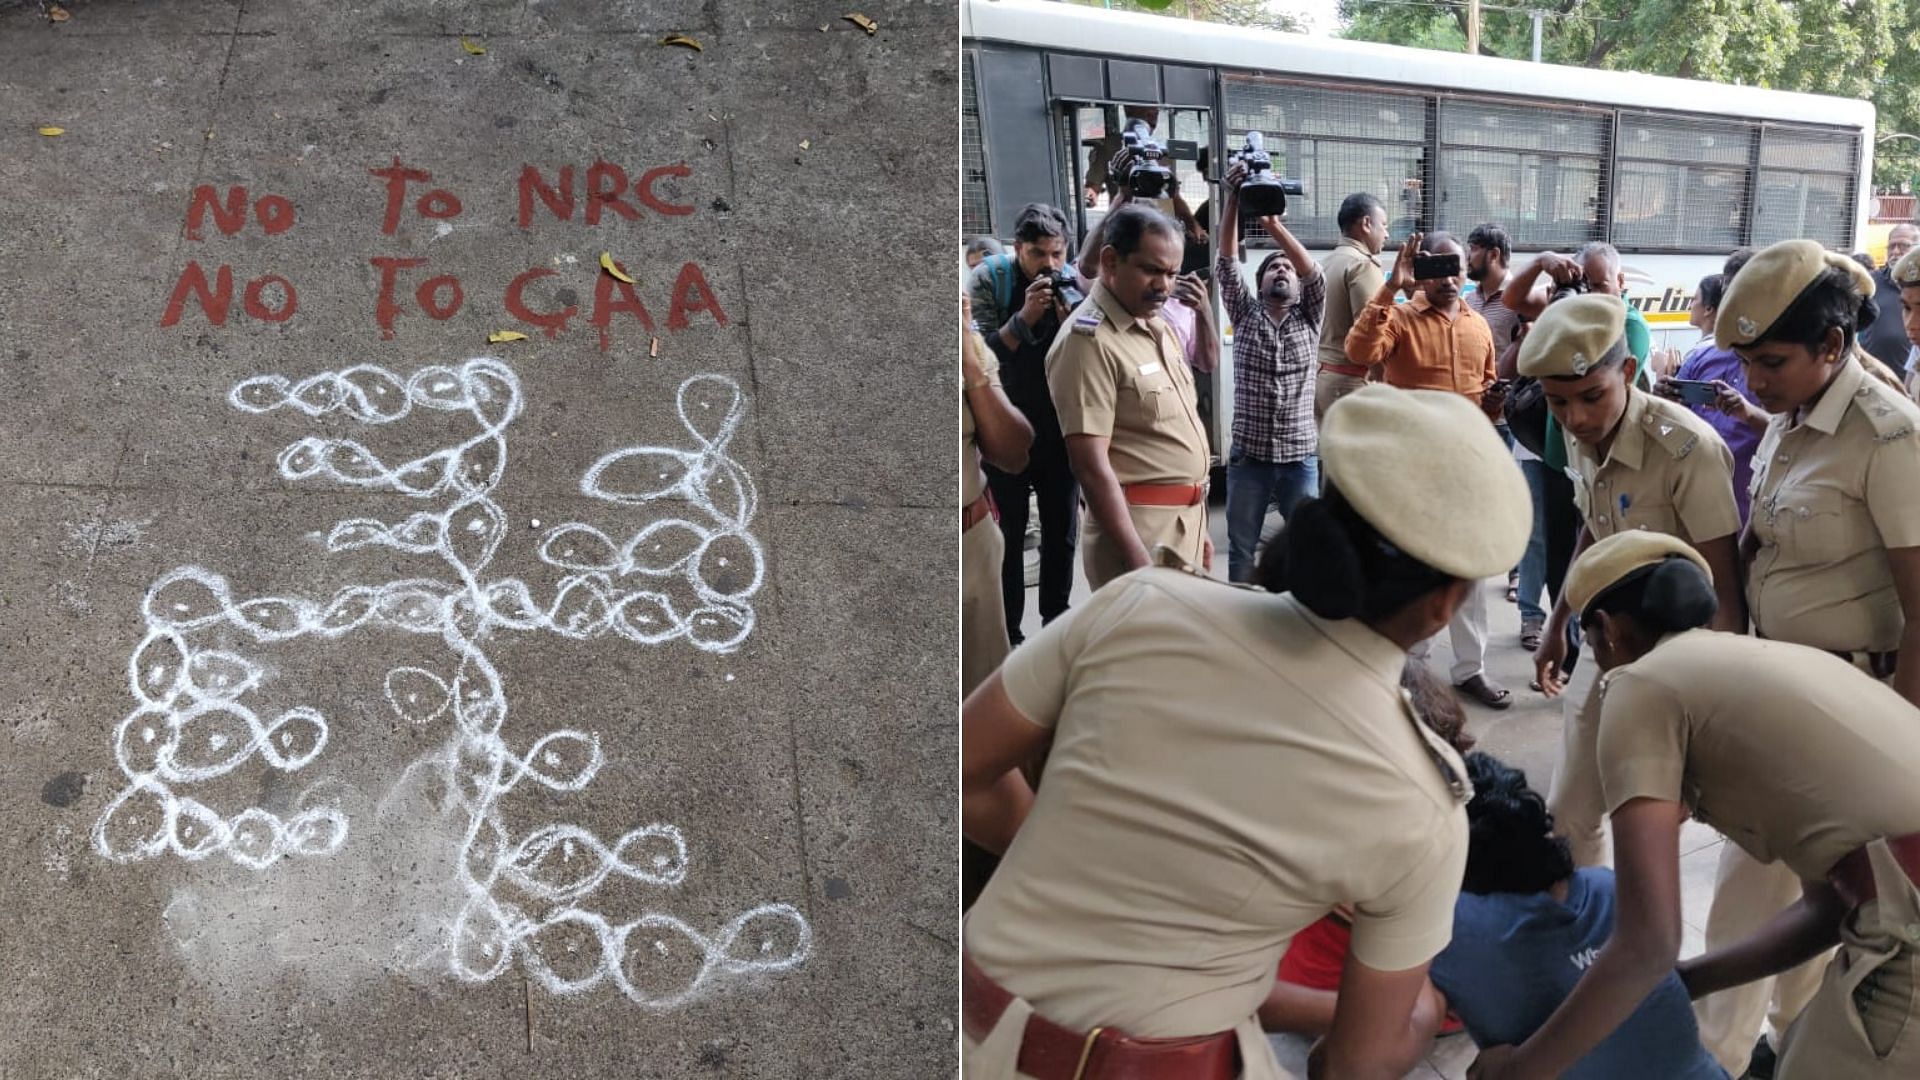 Four women and a man were detained by Chennai police for drawing kolam (rangoli) outside people’s house and common places in Besant Nagar with ANTI-CAA slogans.